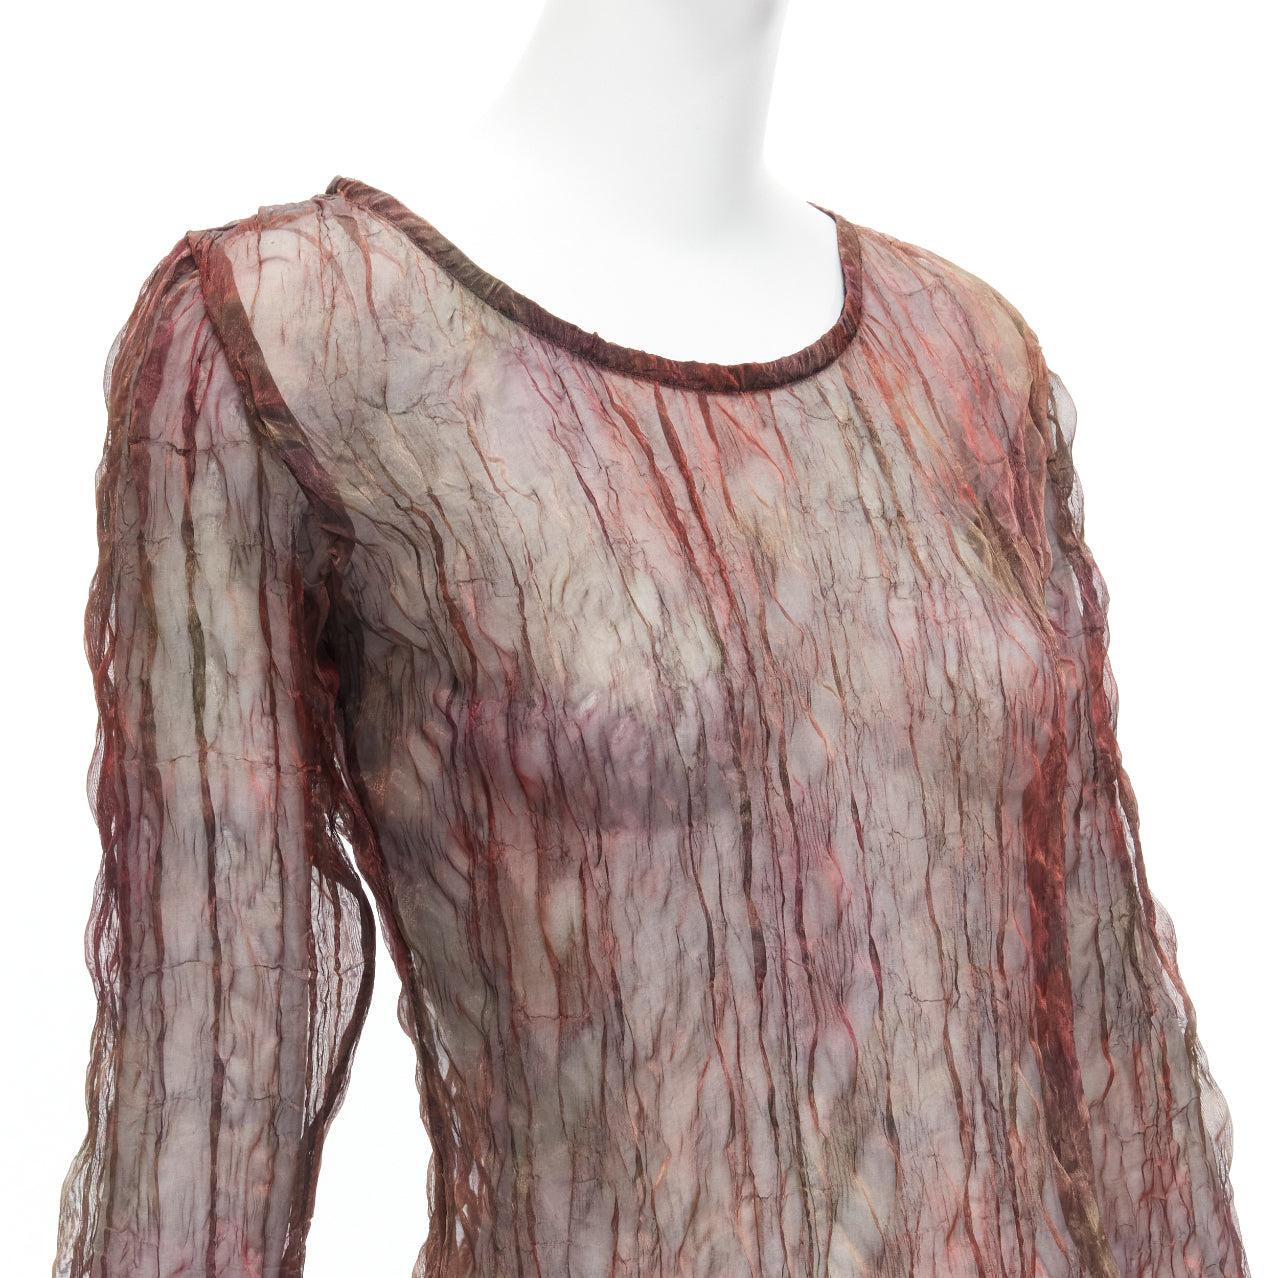 KAAT TILLEY Vintage brown red green crinkled round neck long sleeves sheer dress FR36 S
Reference: TGAS/D00729
Brand: Kaat Tilley
Material: Feels like polyester
Color: Brown, Red
Pattern: Abstract
Closure: Pullover

CONDITION:
Condition: Excellent,